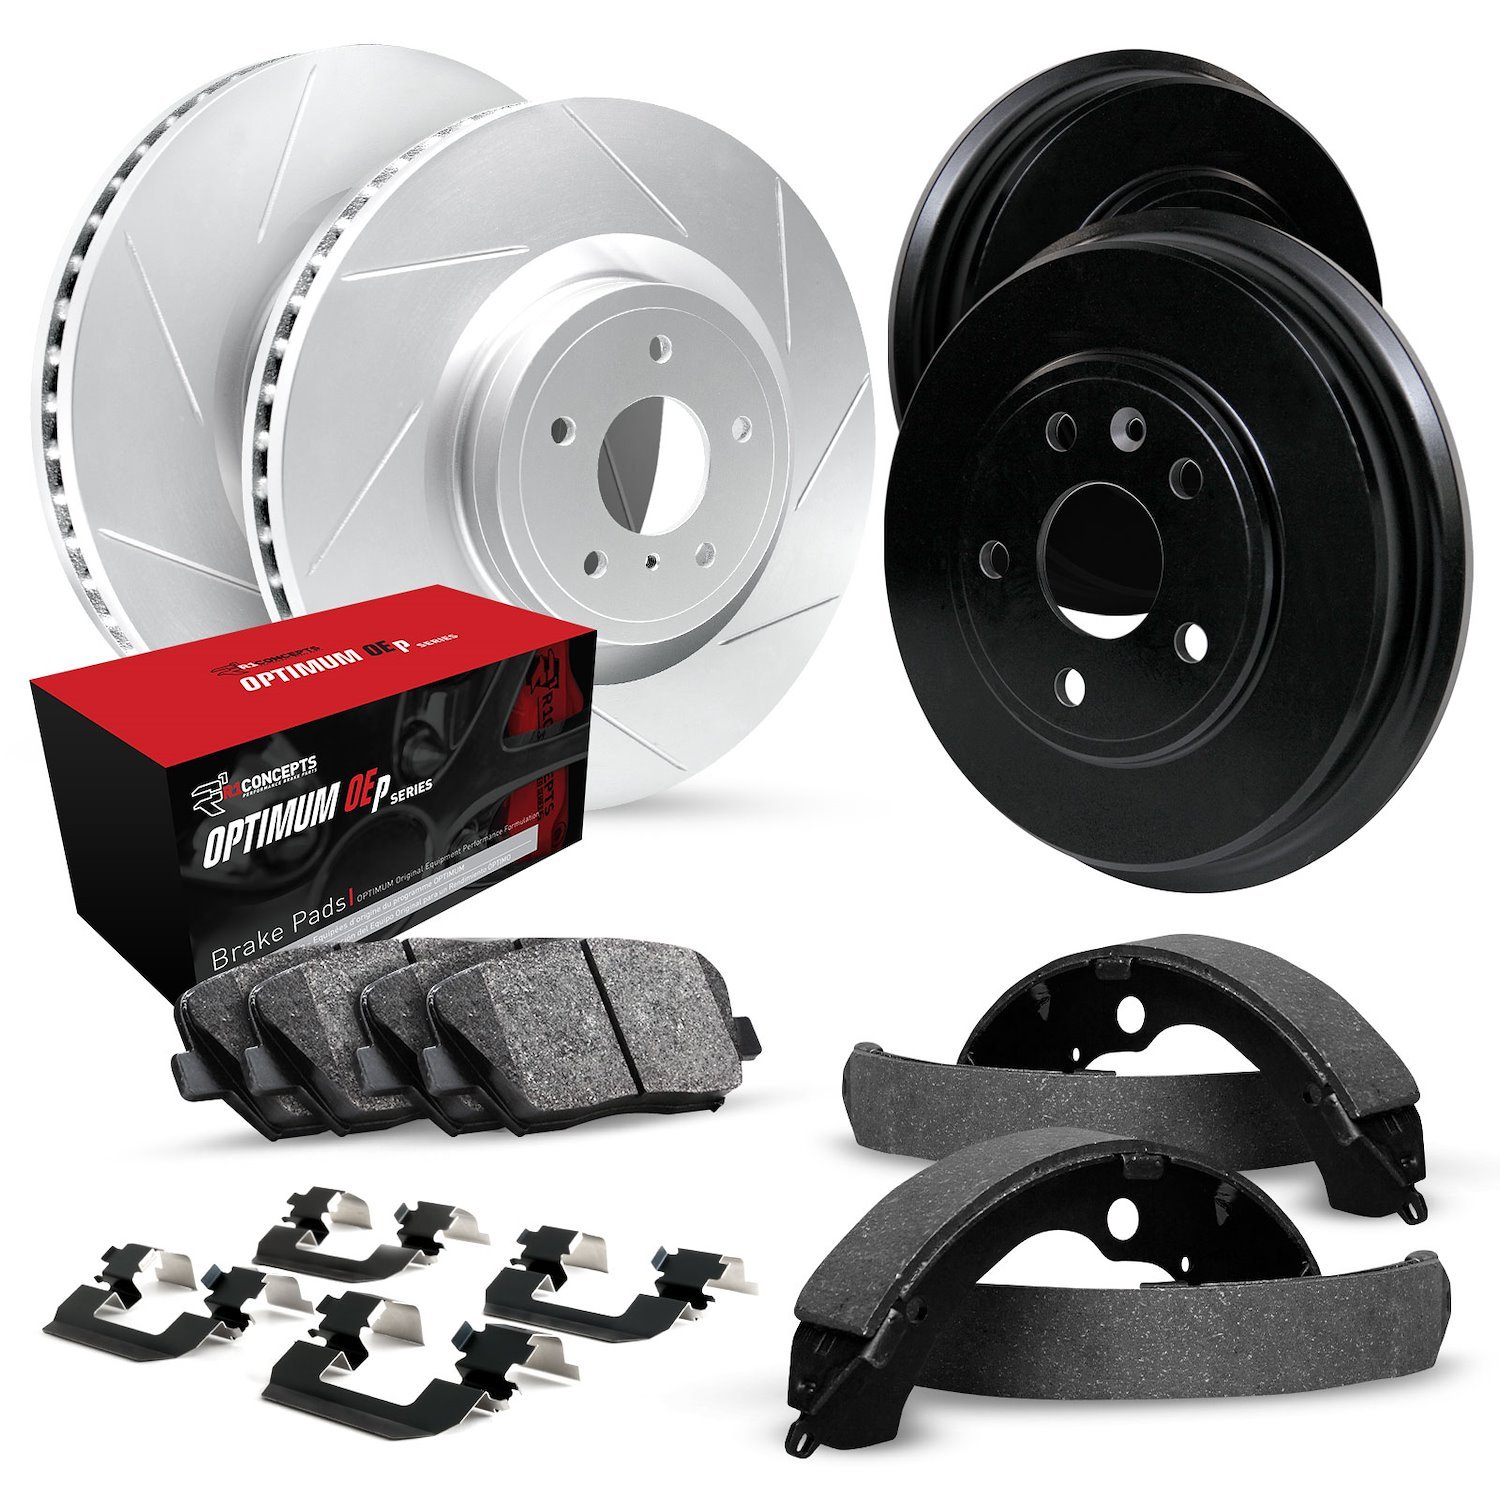 GEO-Carbon Slotted Brake Rotor & Drum Set w/Optimum OE Pads, Shoes, & Hardware, 1978-1980 GM, Position: Front & Rear